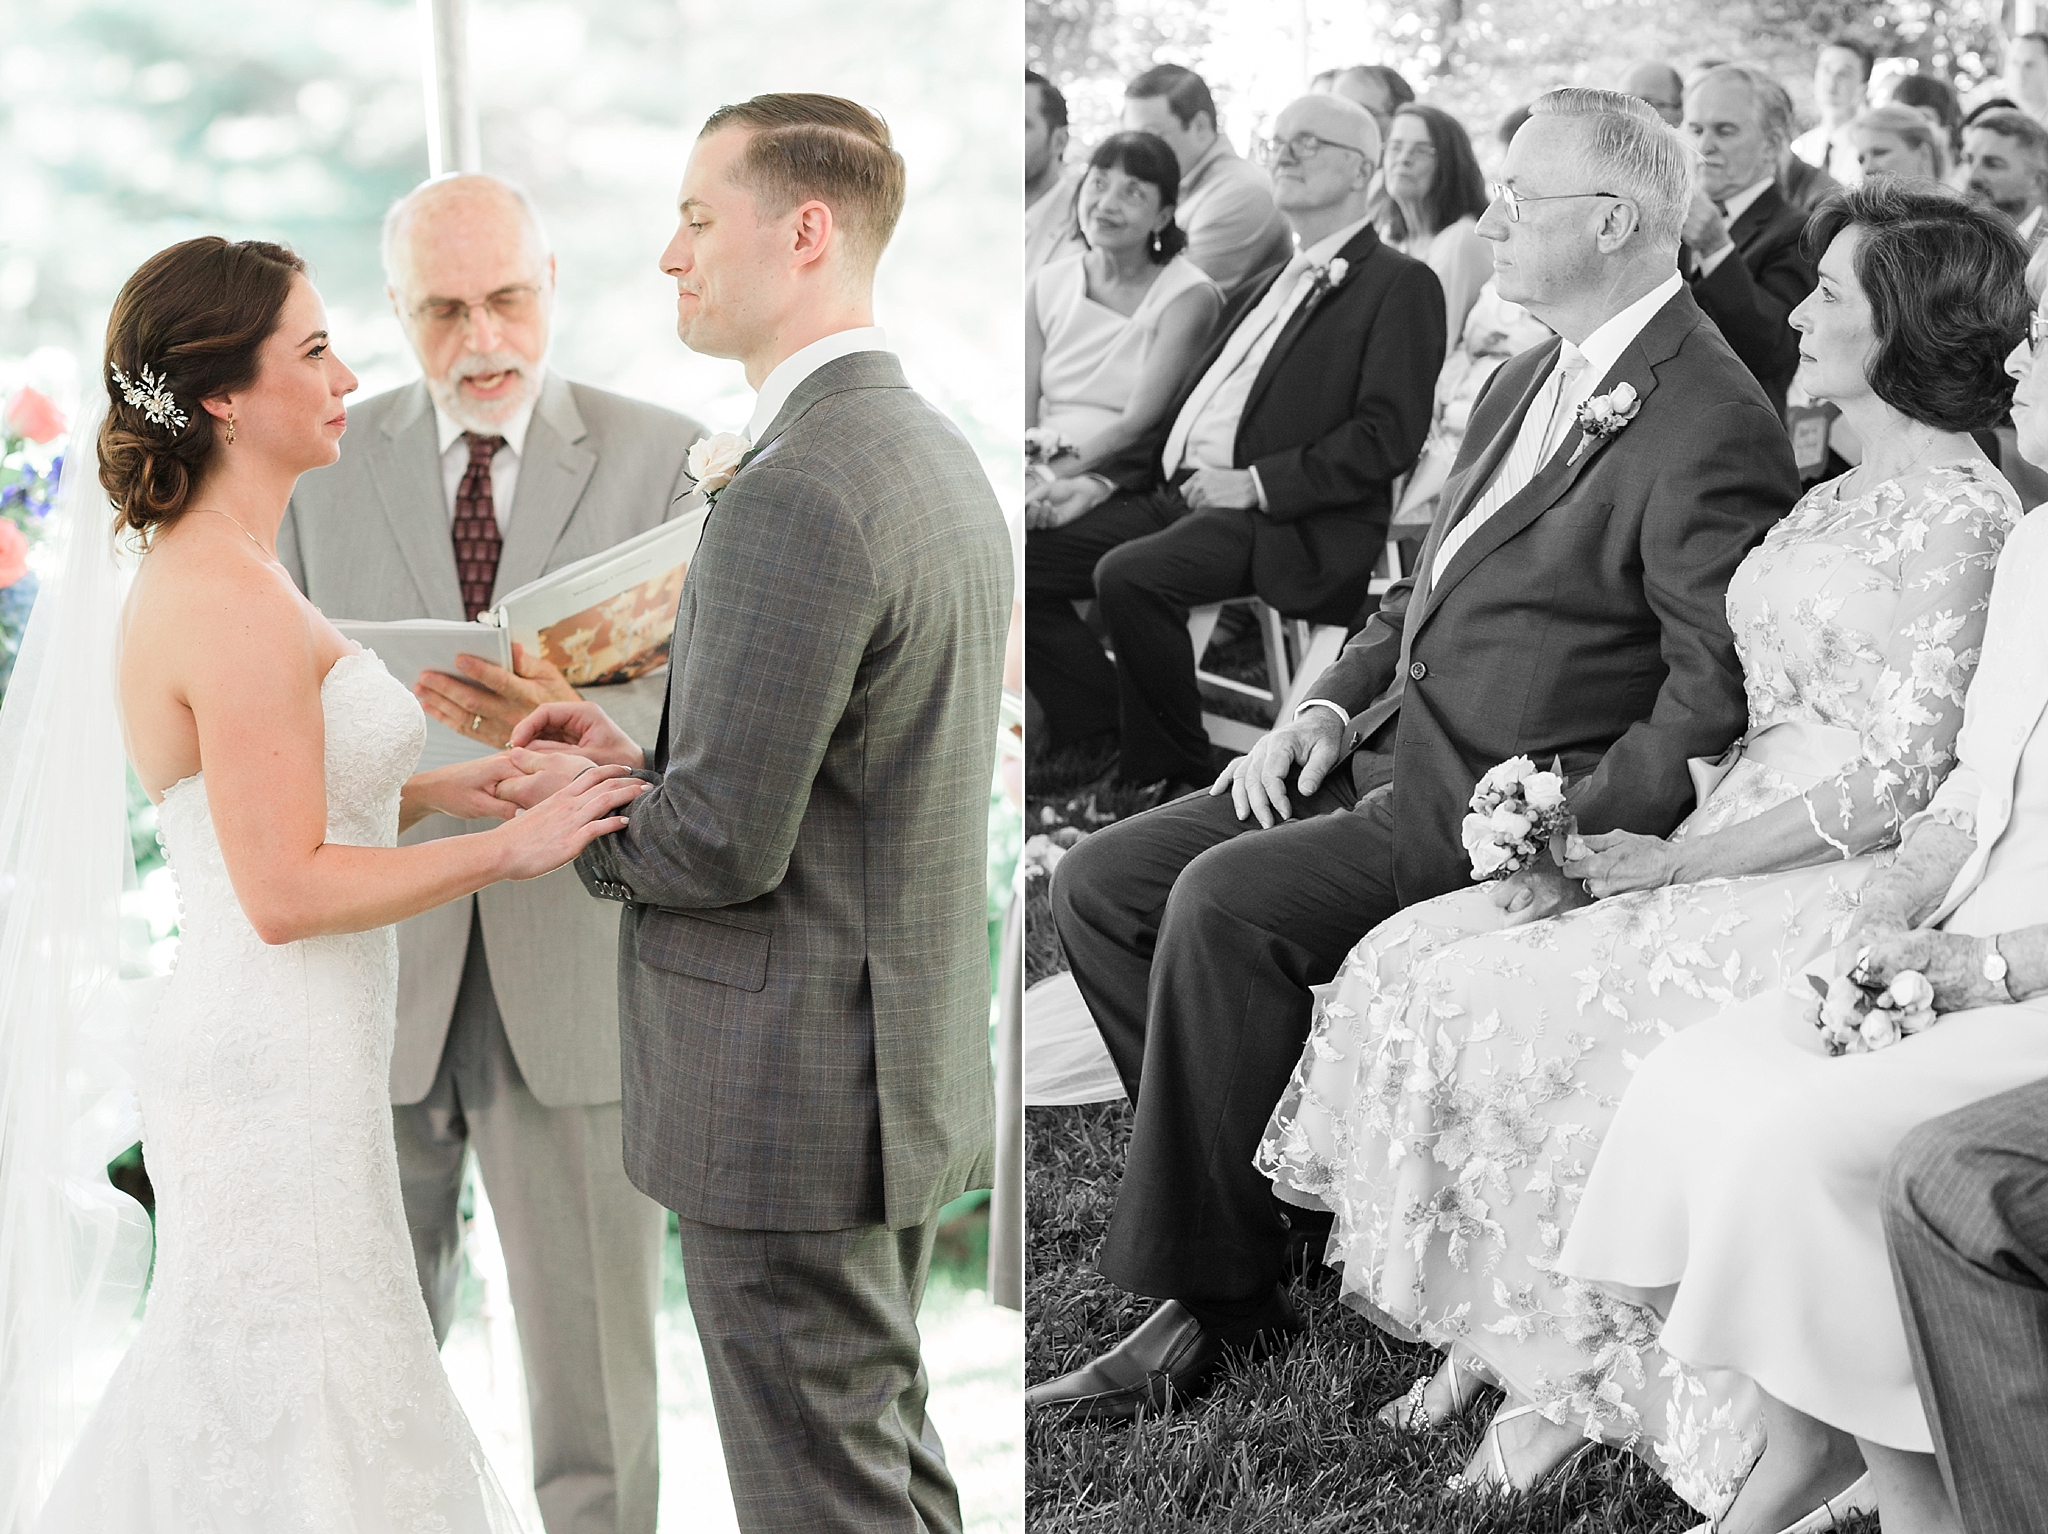 This chic summery Airlie wedding in Warrenton, VA was photographed by Washington, DC photographer, Alicia Lacey.